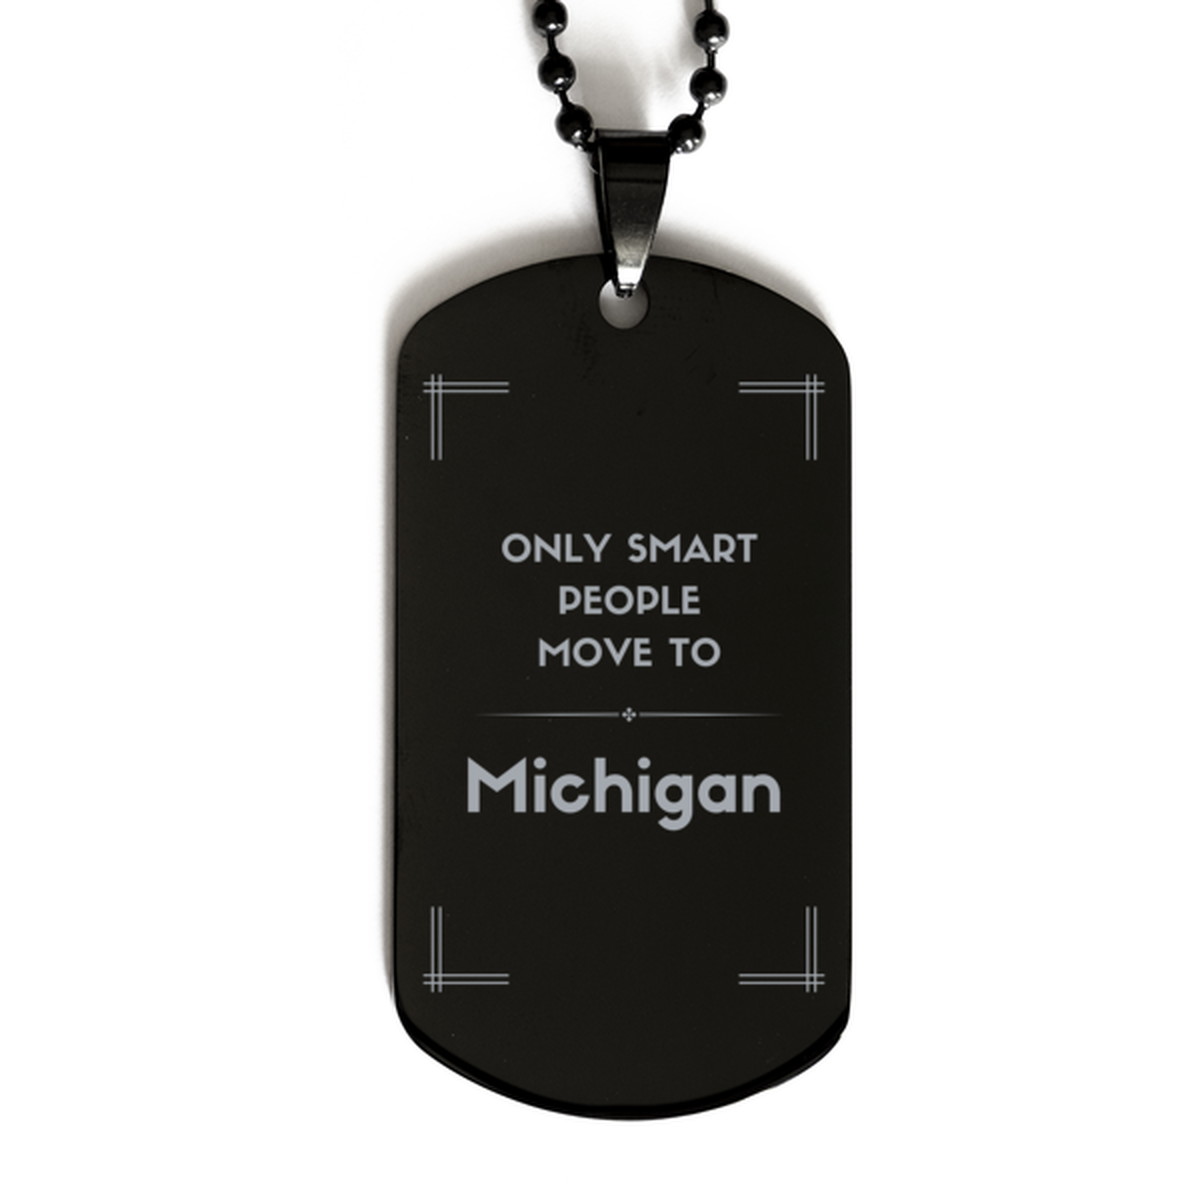 Only smart people move to Michigan Black Dog Tag, Gag Gifts For Michigan, Move to Michigan Gifts for Friends Coworker Funny Saying Quote